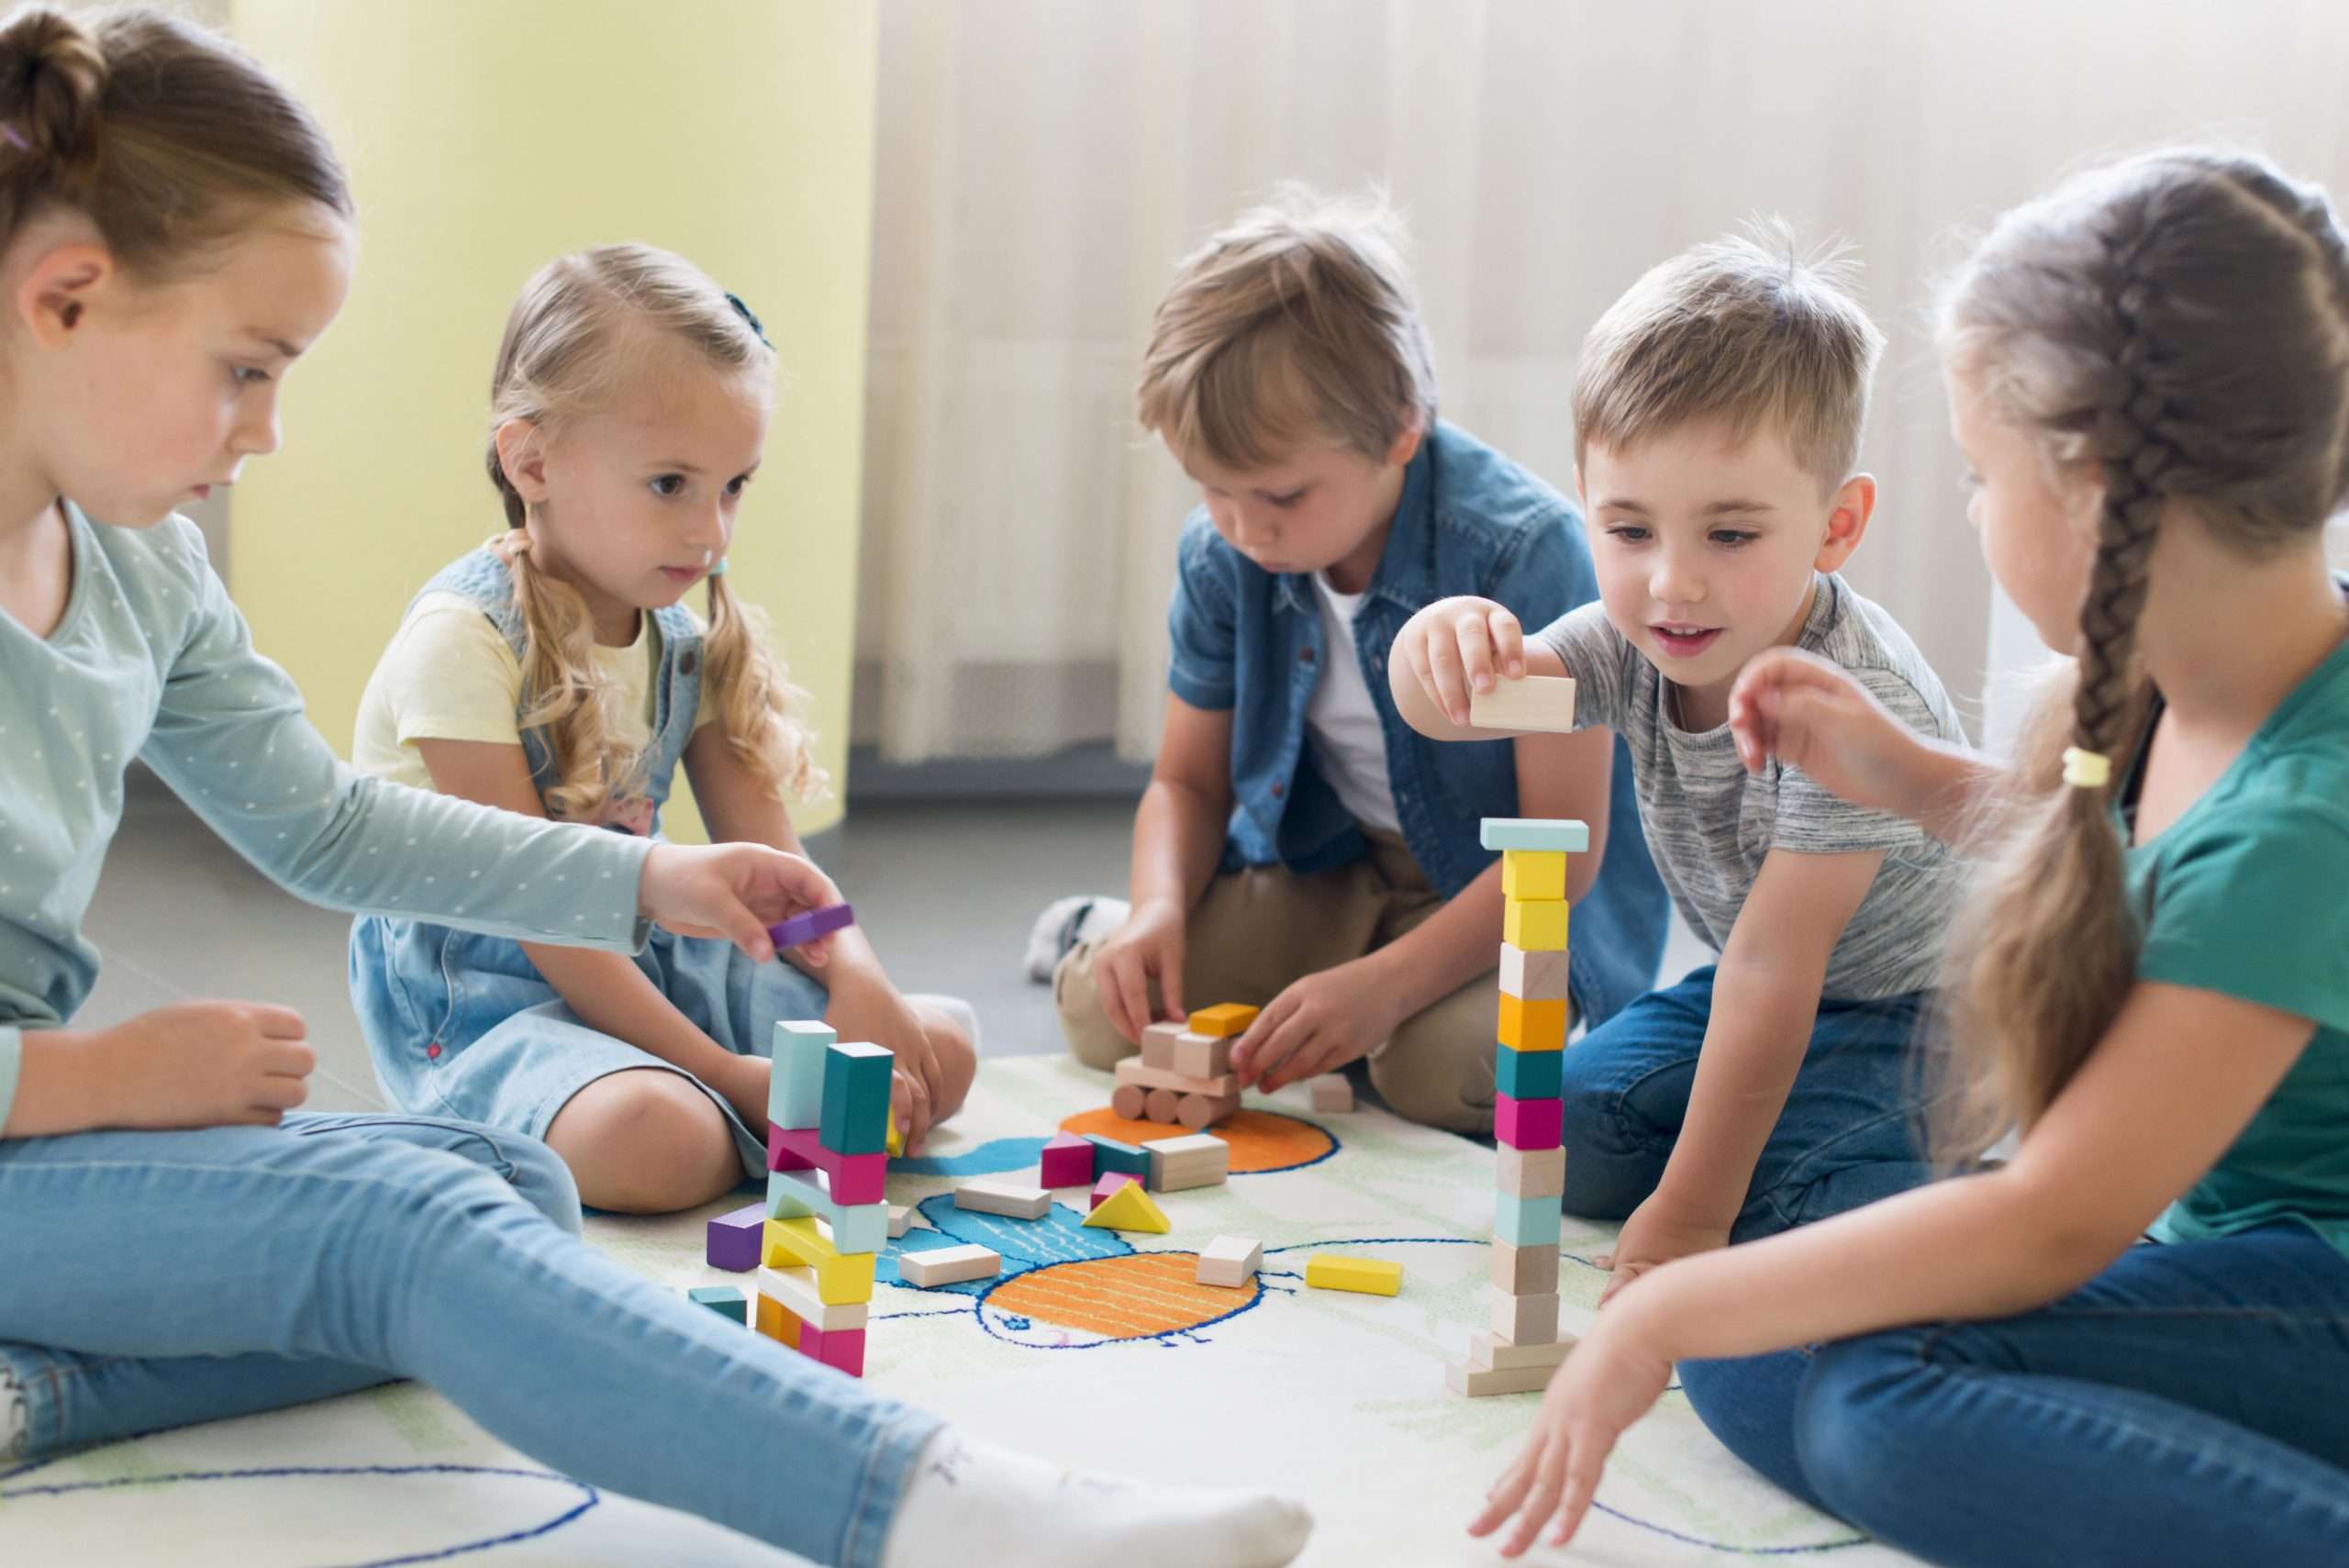 ACTIVITIES, Activities, Cognitive Behavioral Play Therapy